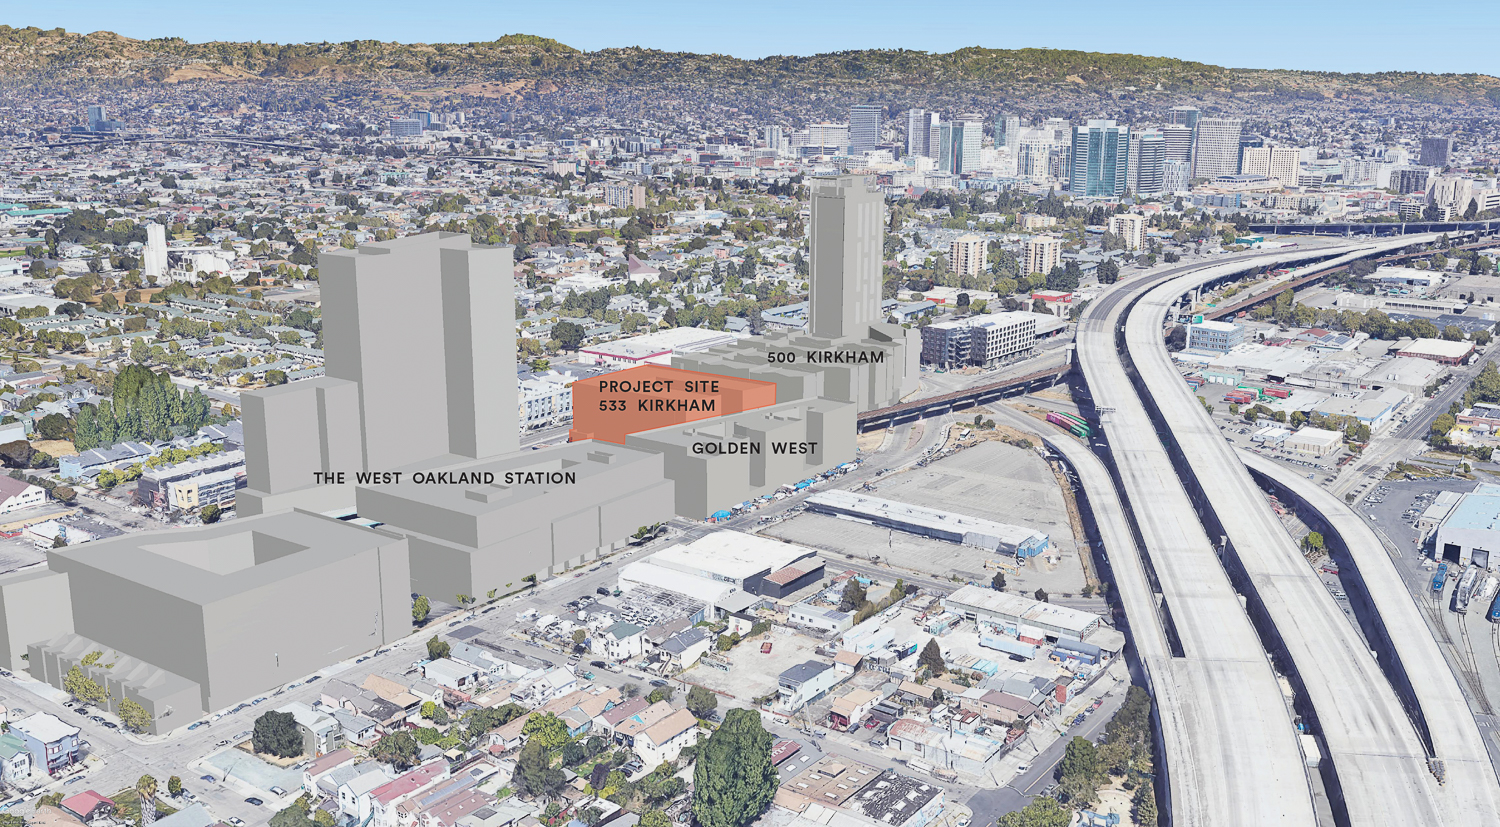 533 Kirkham Street aerial view with neighboring proposals in grey, rendering by Solomon Cordwell Buenz